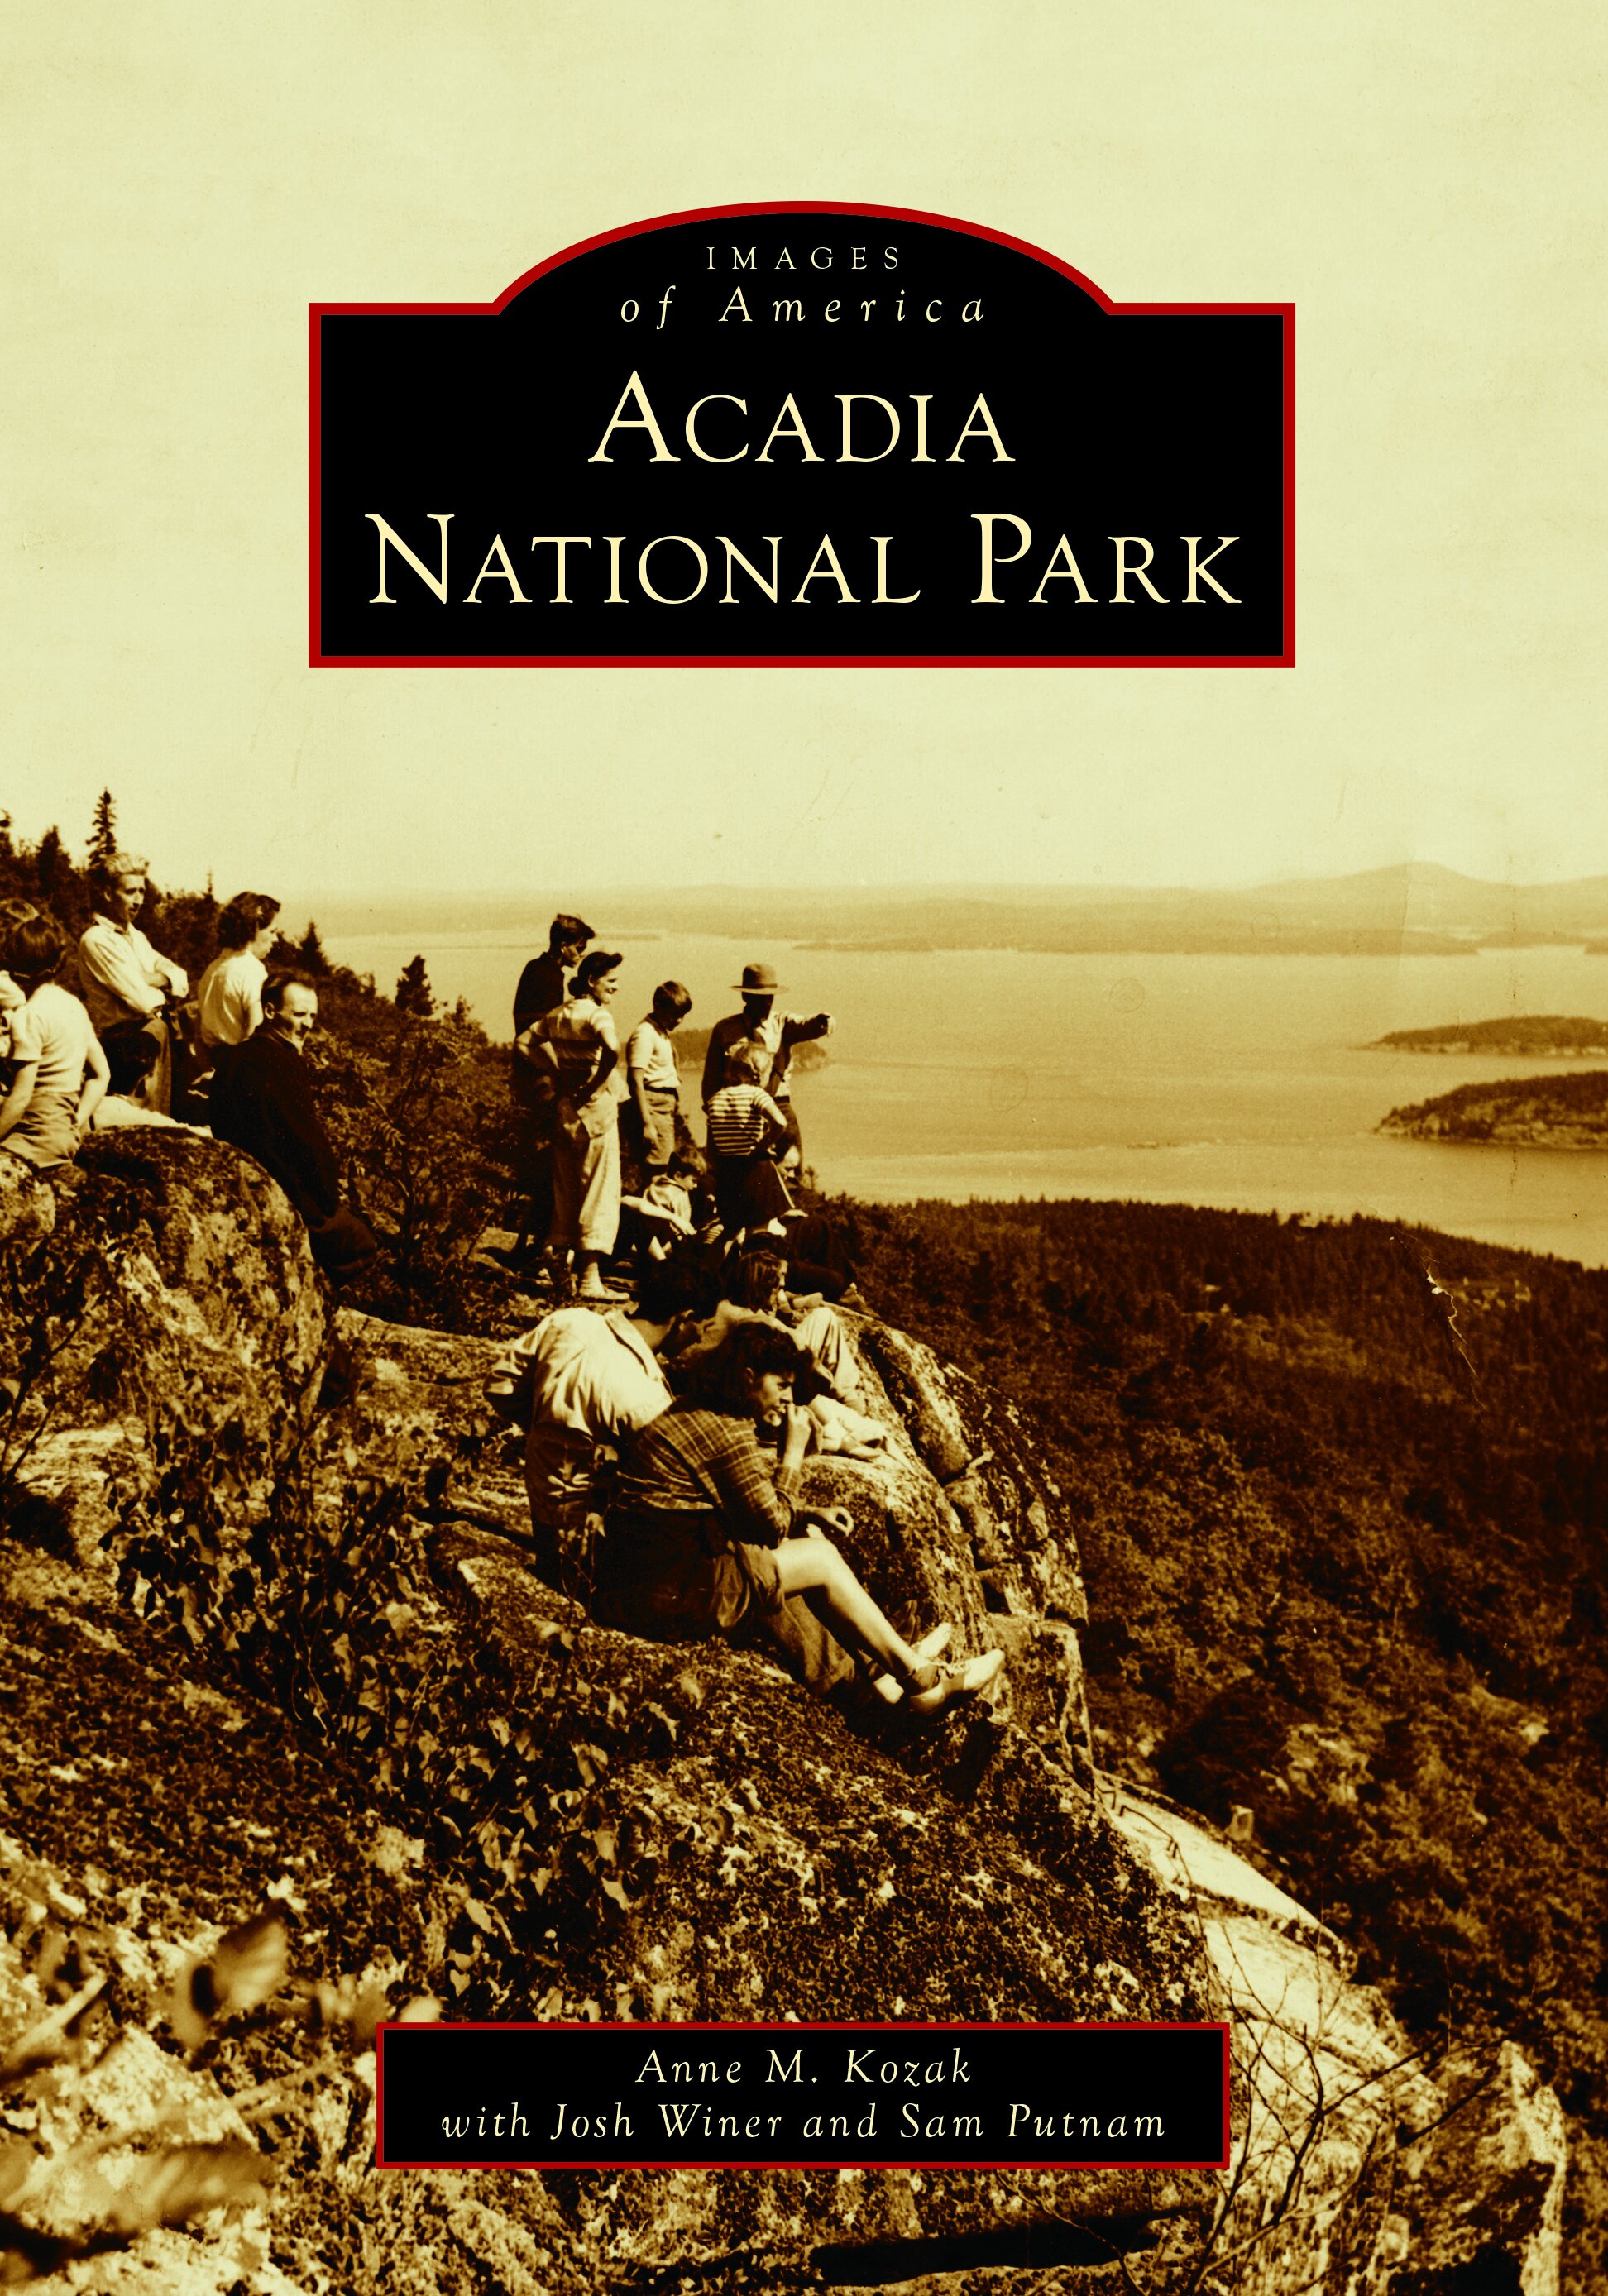 Cover of Anne Kozak’s book, "Images of America: Acadia National Park"